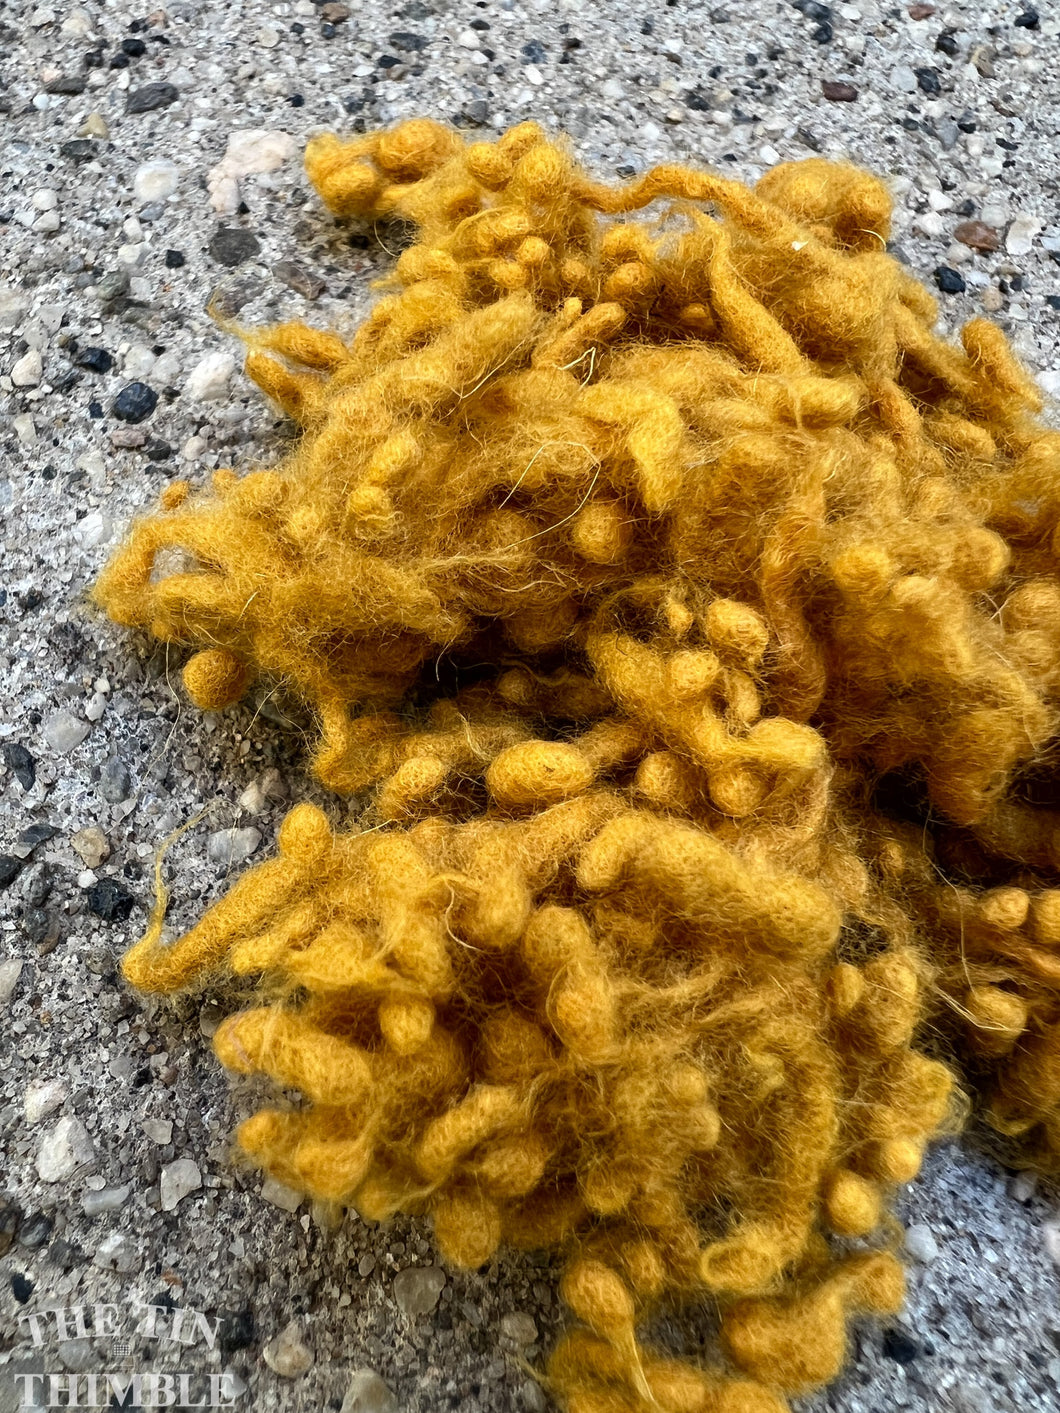 Saffron Yellow Gold Wool Nepps or Nibs for Felting by DHG / 1/8 Oz or More / Commercially Dyed Textural Fibers for Nuno or Wet Felting